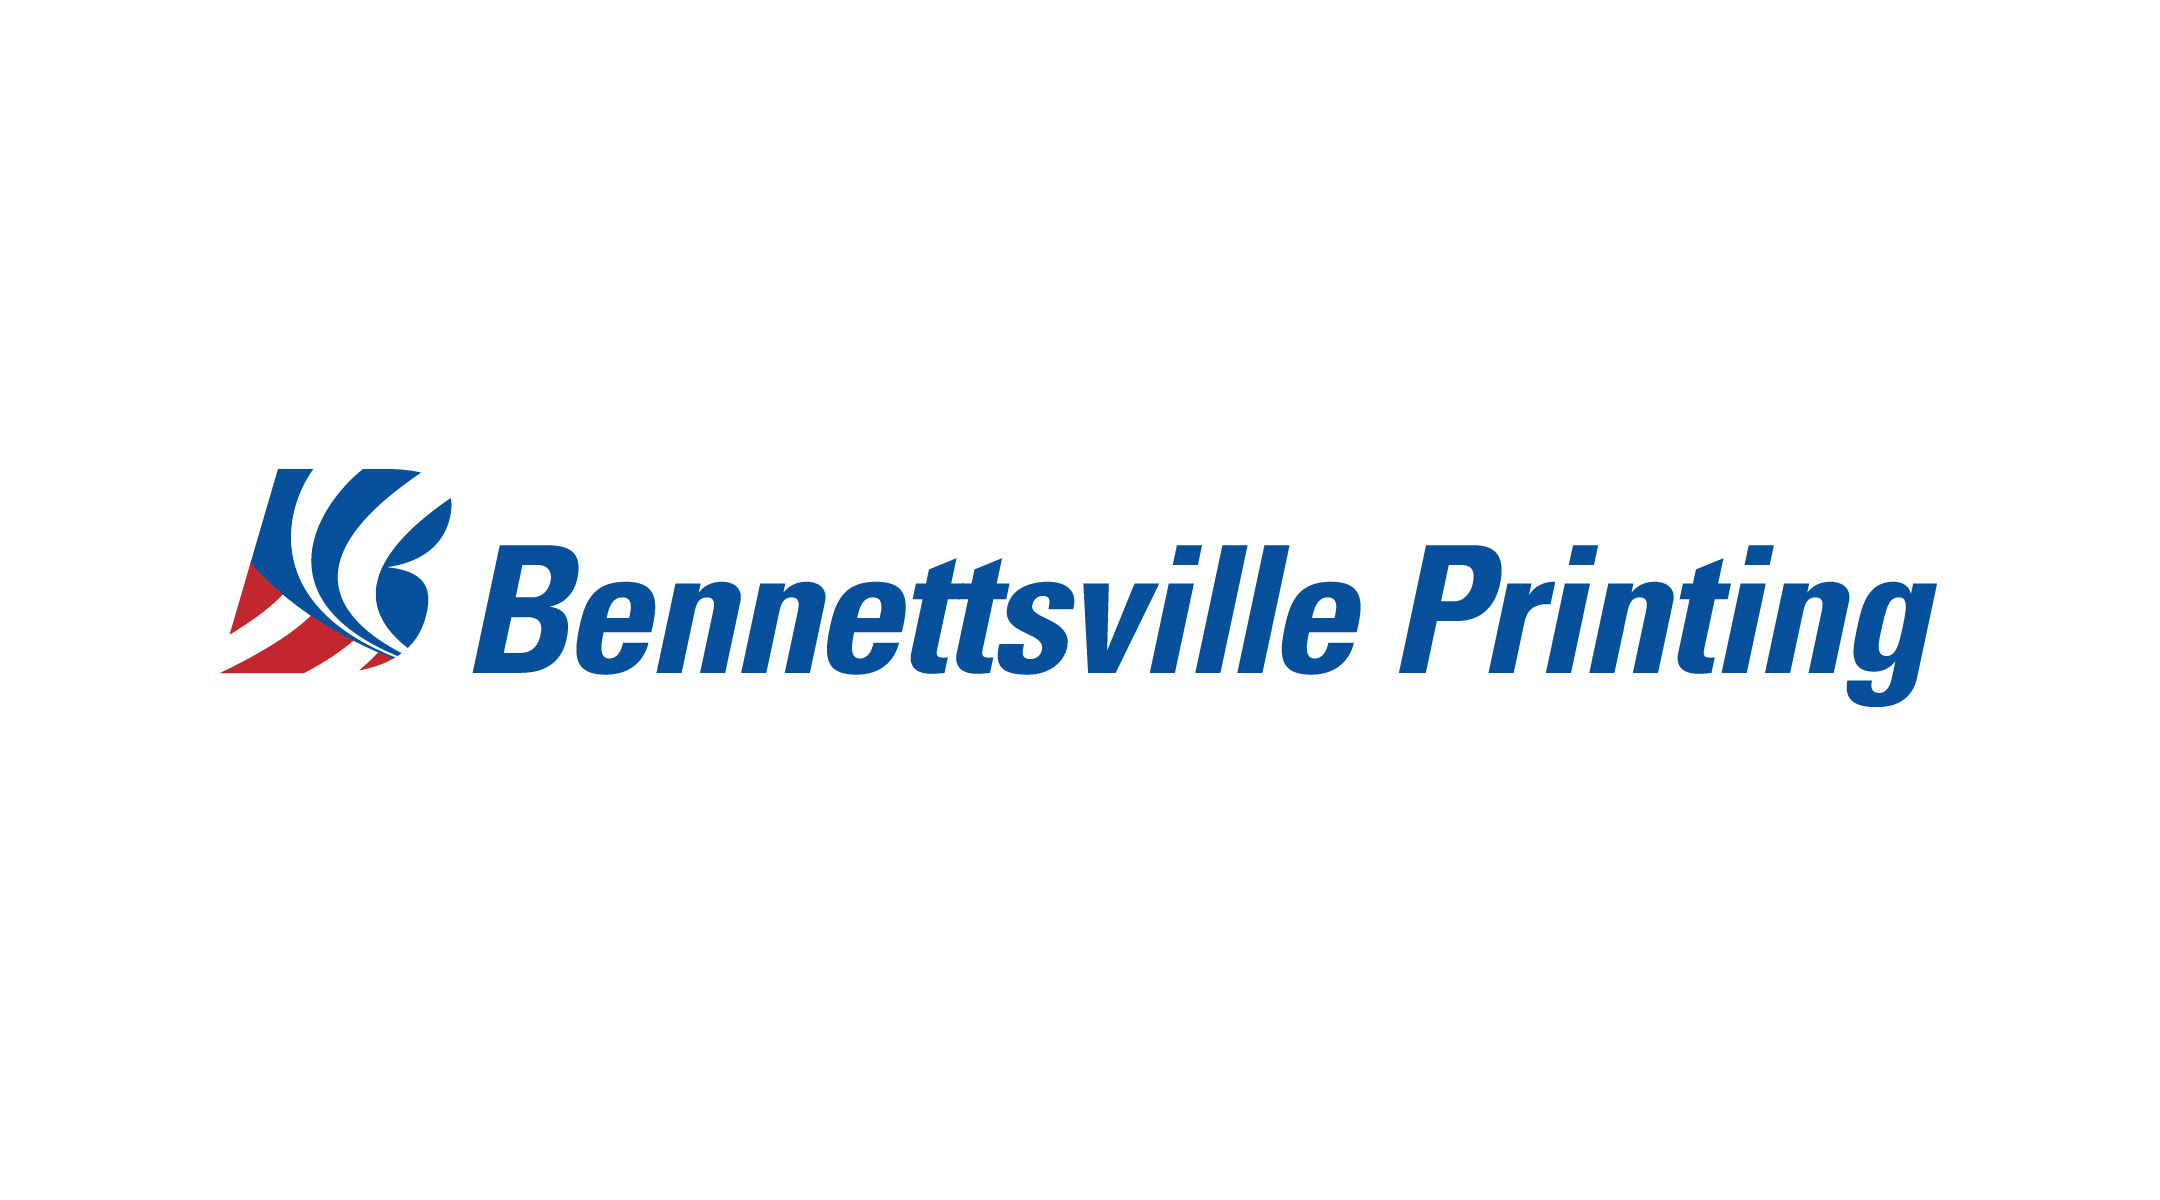 Logotype for Benettsville Printing, a military textiles printer  based in New London, CT.